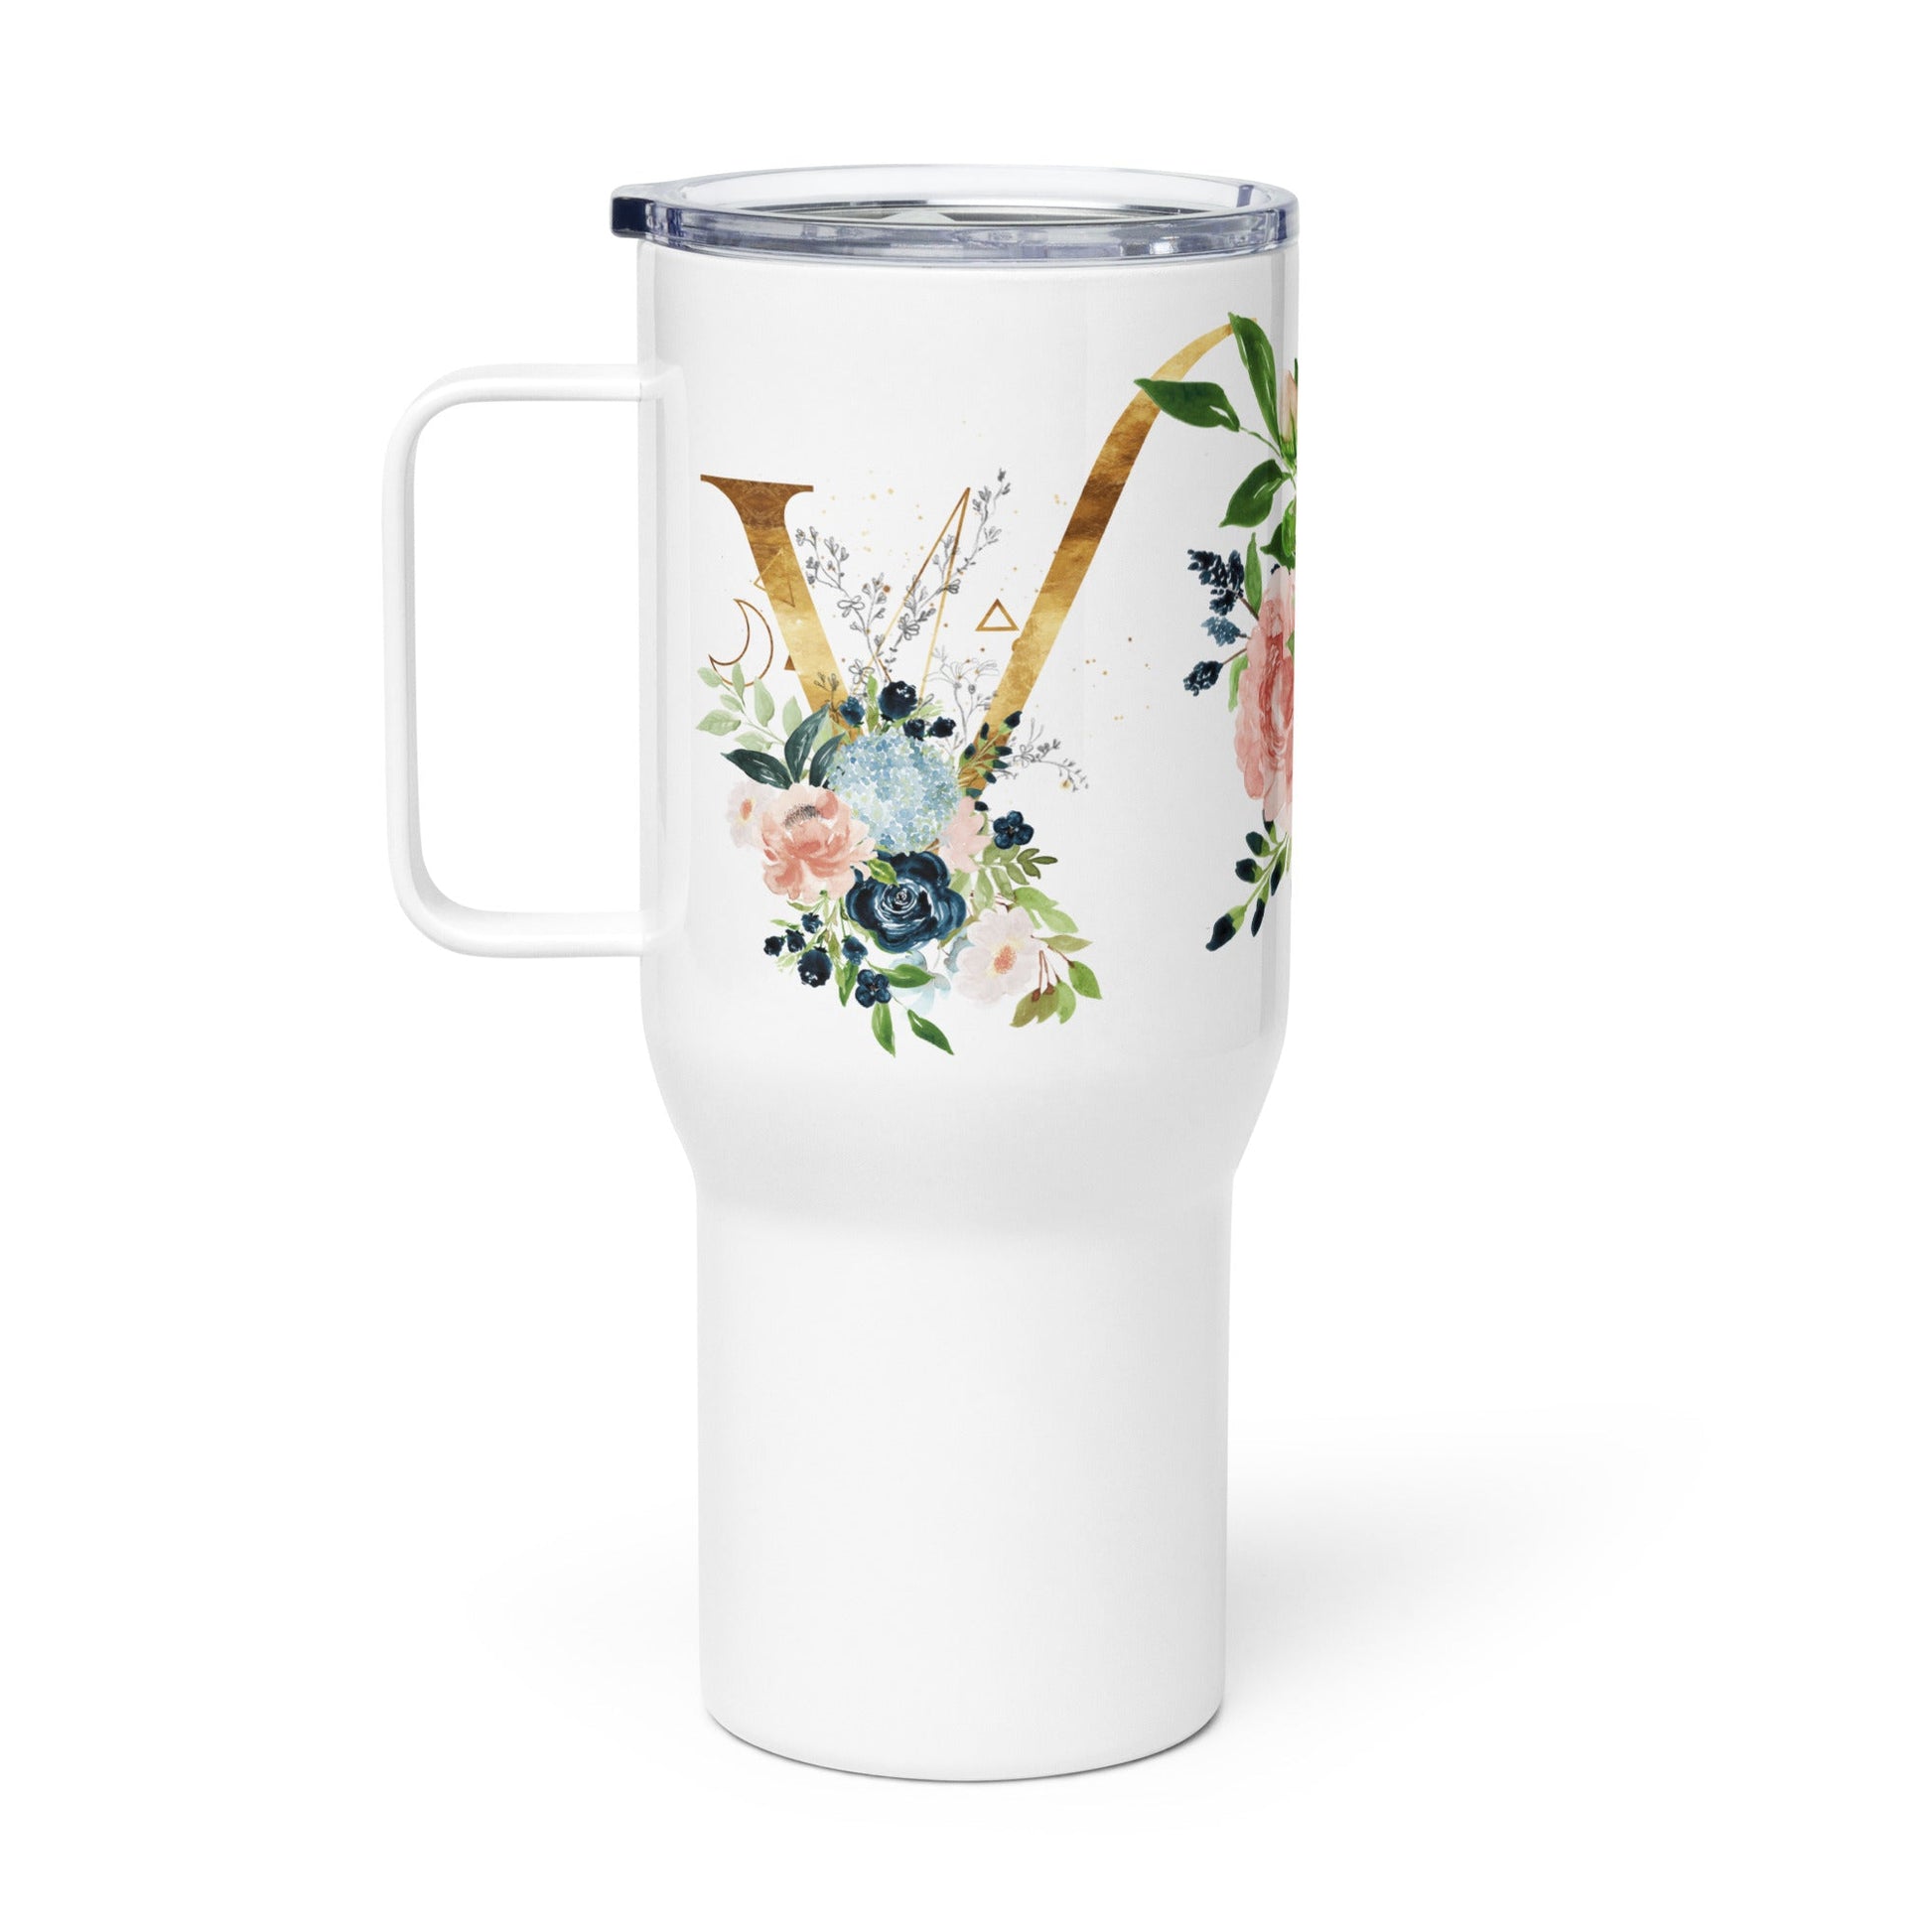 Travel mug with a handle - Cultured Bakehouse